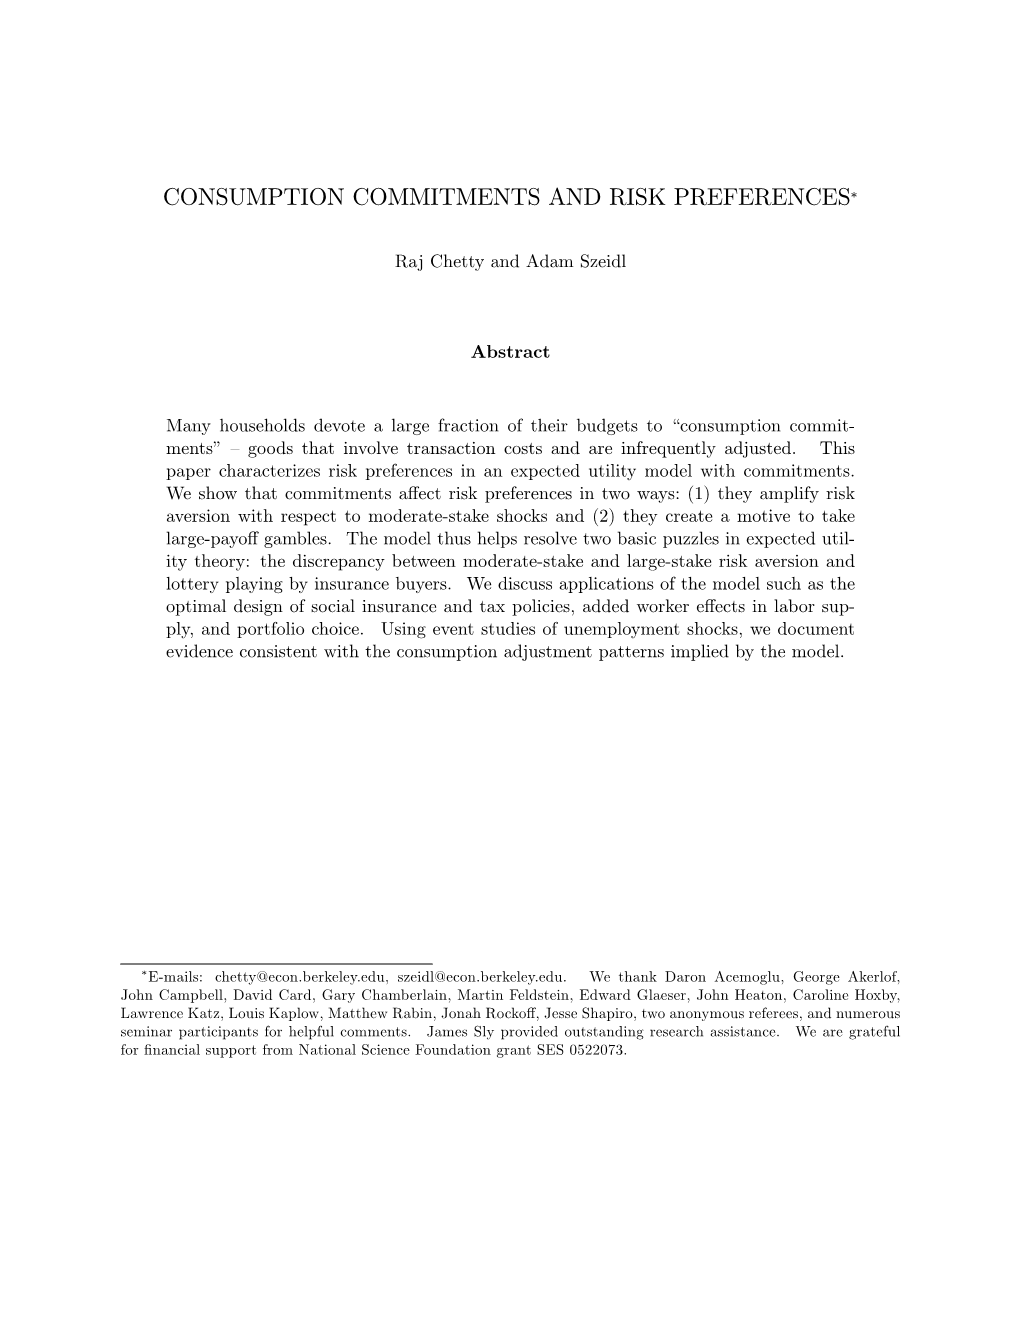 Consumption Commitments and Risk Preferences*